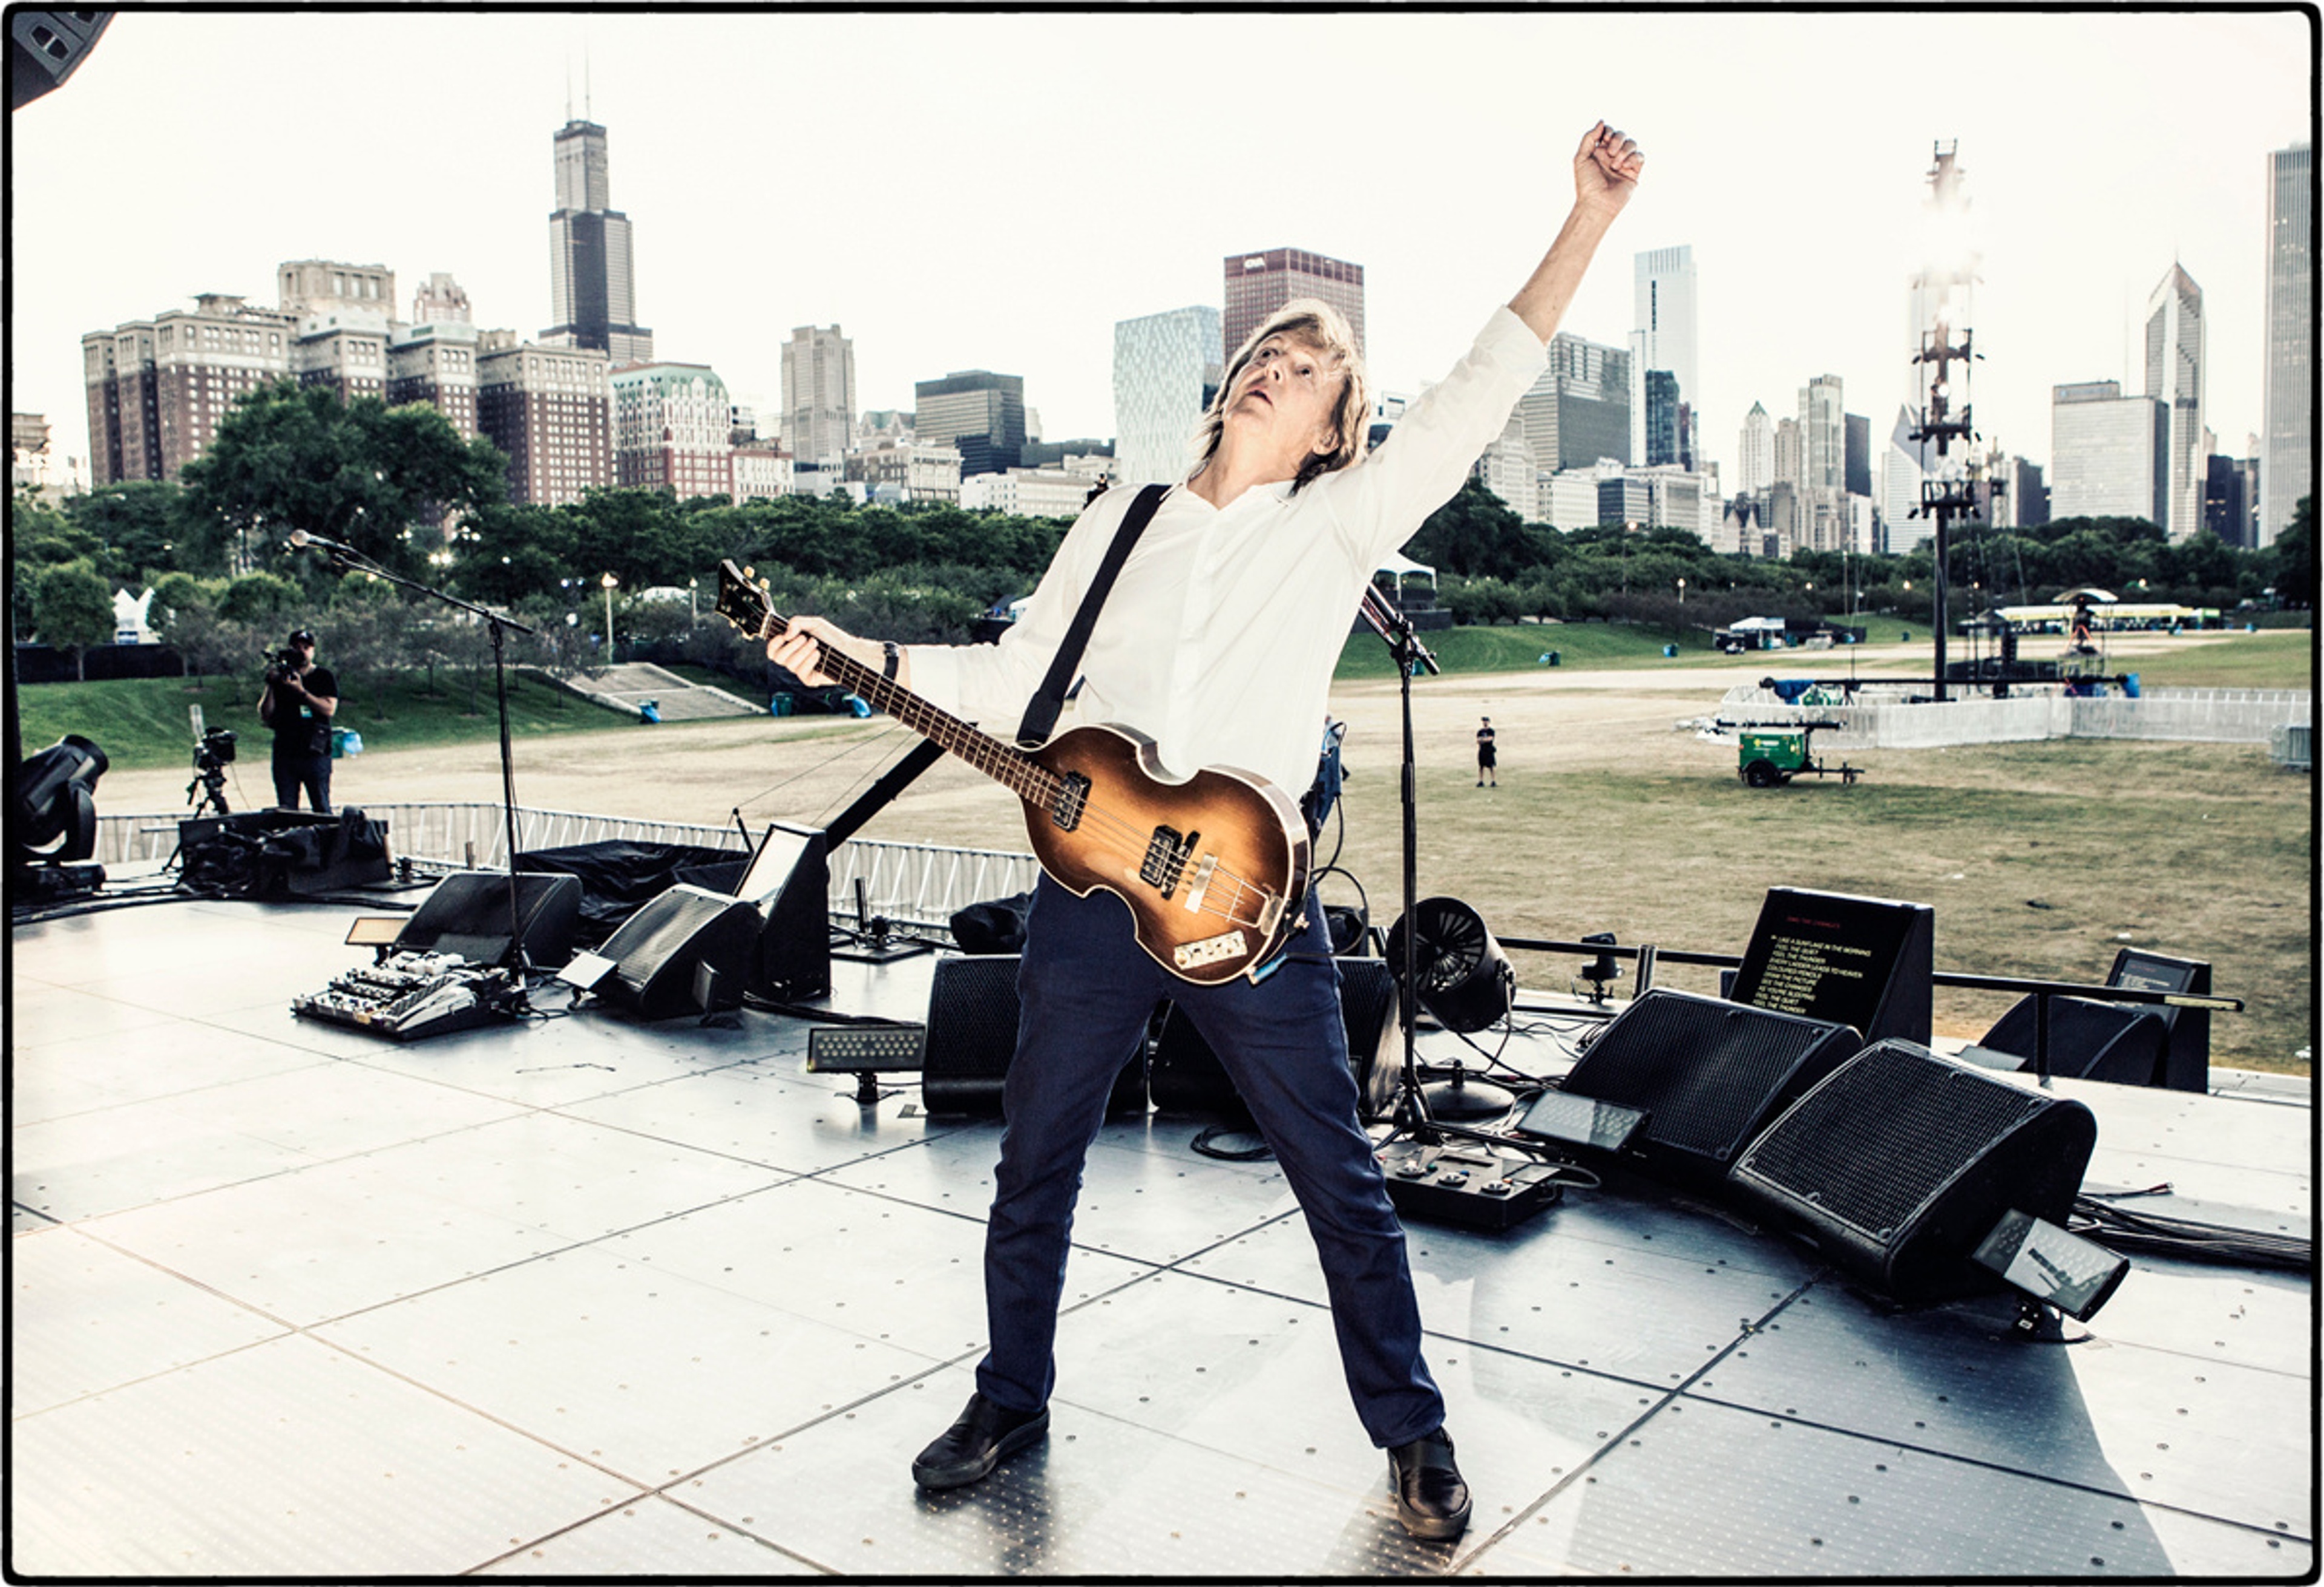 Rehearsals, Lollapalooza Festival, Grant Park, Chicago - 31st July 2015